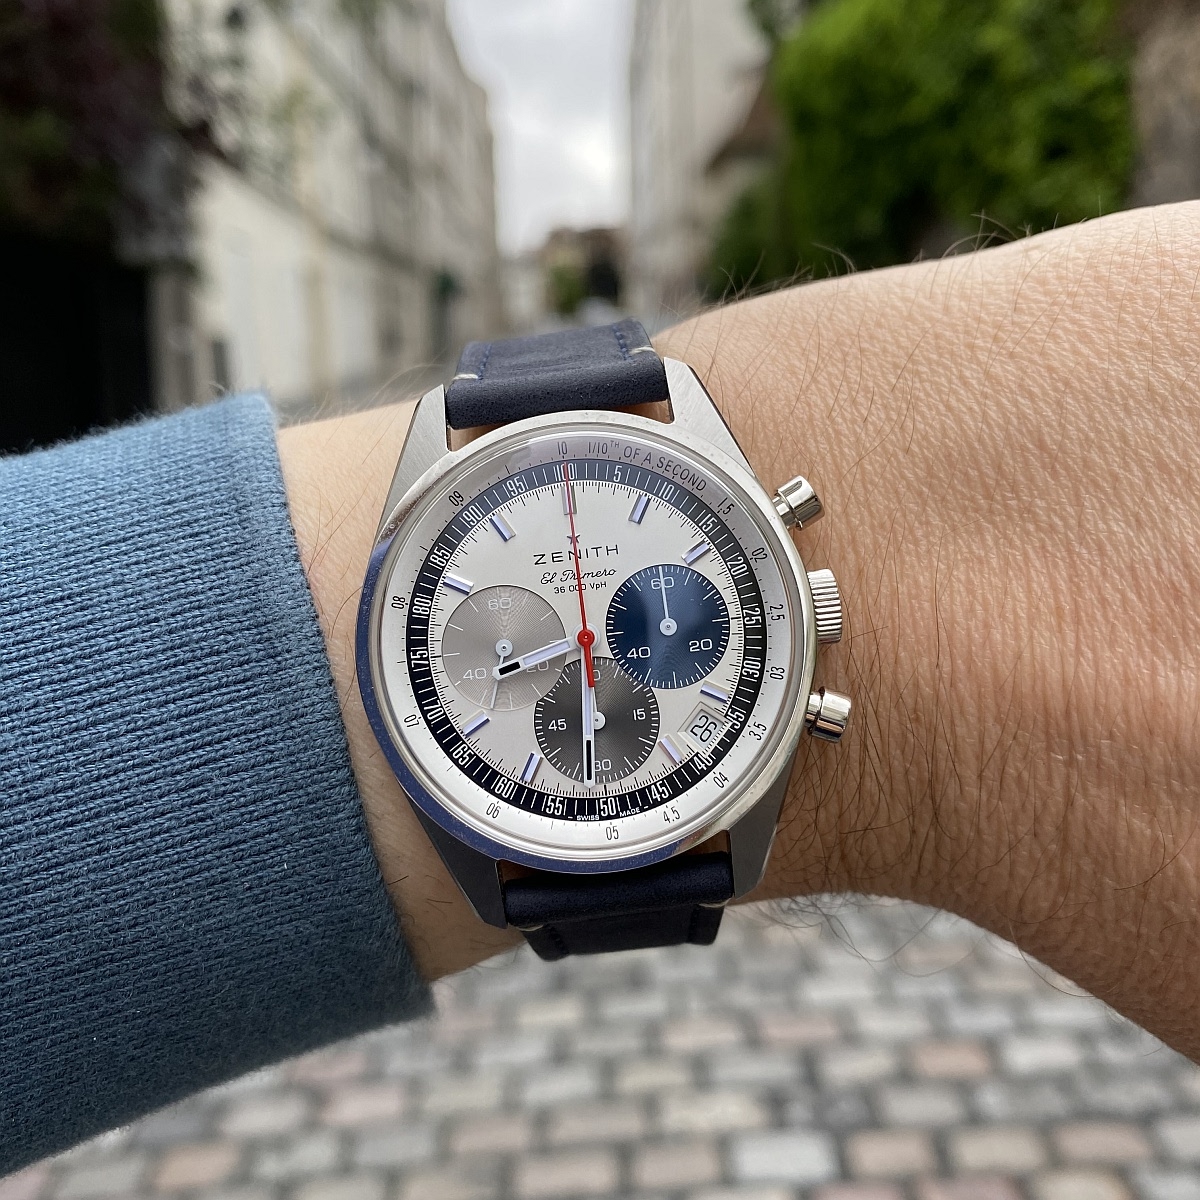 Zenith - Hands on review of the Zenith Chronomaster Sport